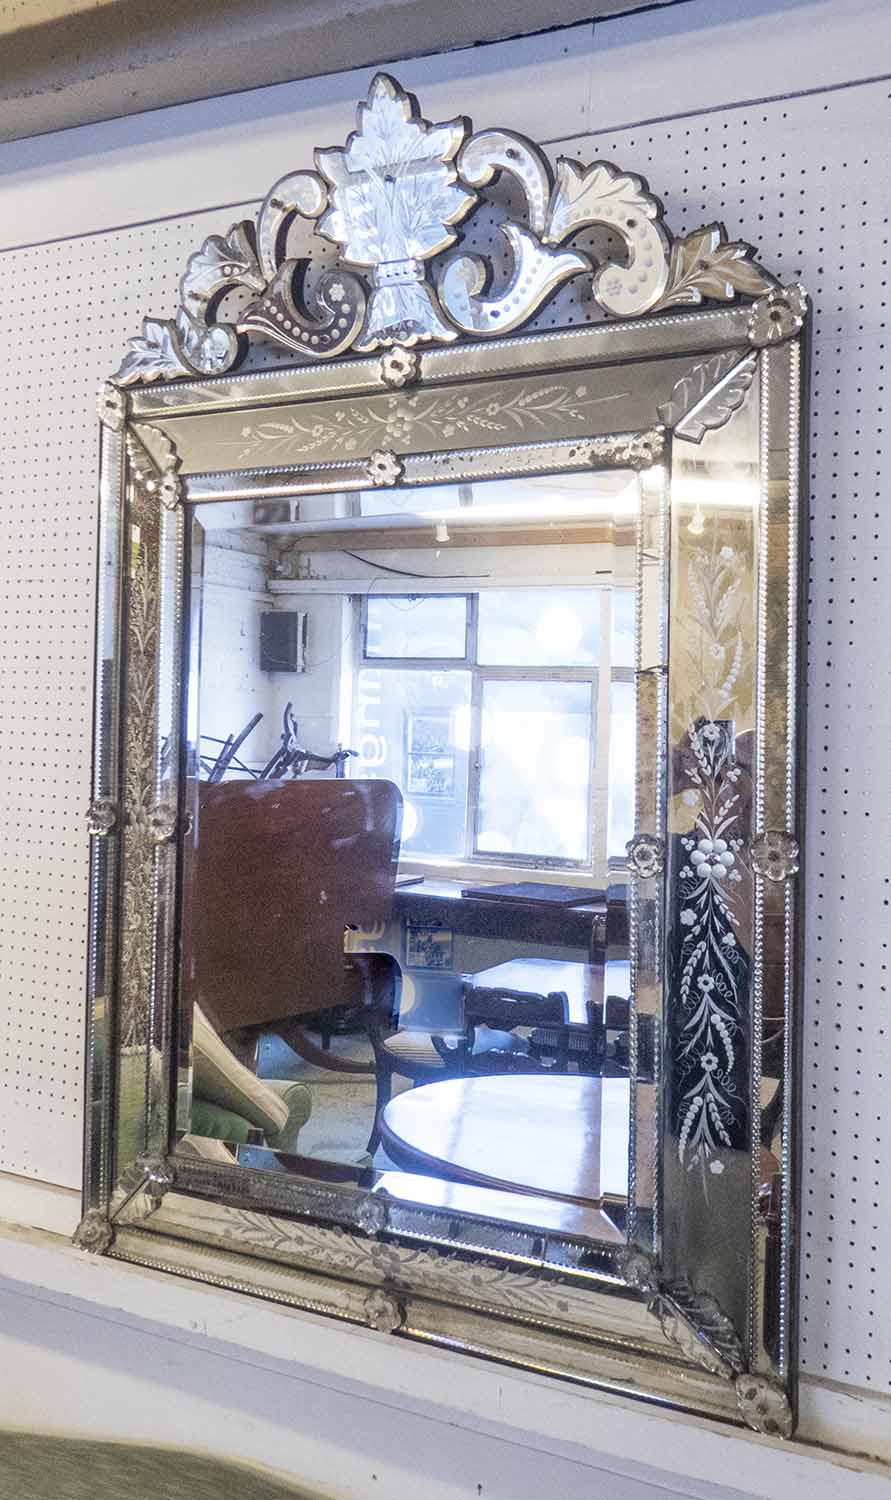 VENETIAN WALL MIRROR, late 19th Century with etched decorative detail